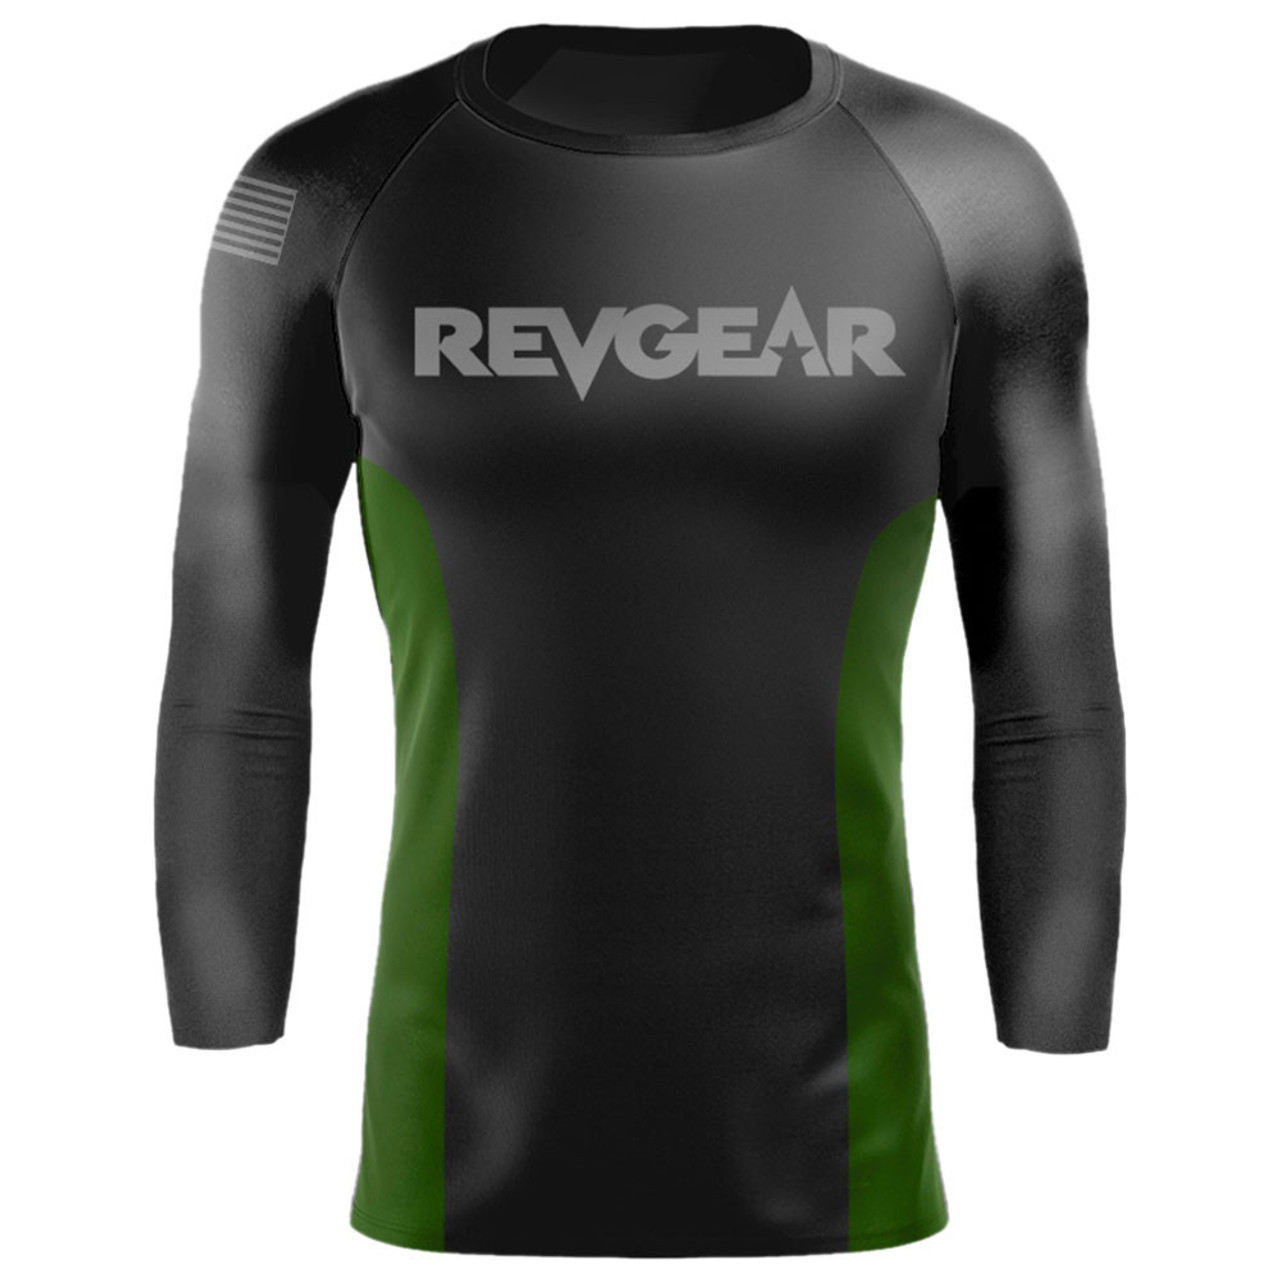 https://cdn11.bigcommerce.com/s-l7n8qpii/images/stencil/1280x1280/products/7232/29645/revgear-bionic-compression-shirt-long-sleeve-black-with-olive-green__55930.1710202577.jpg?c=2?imbypass=on